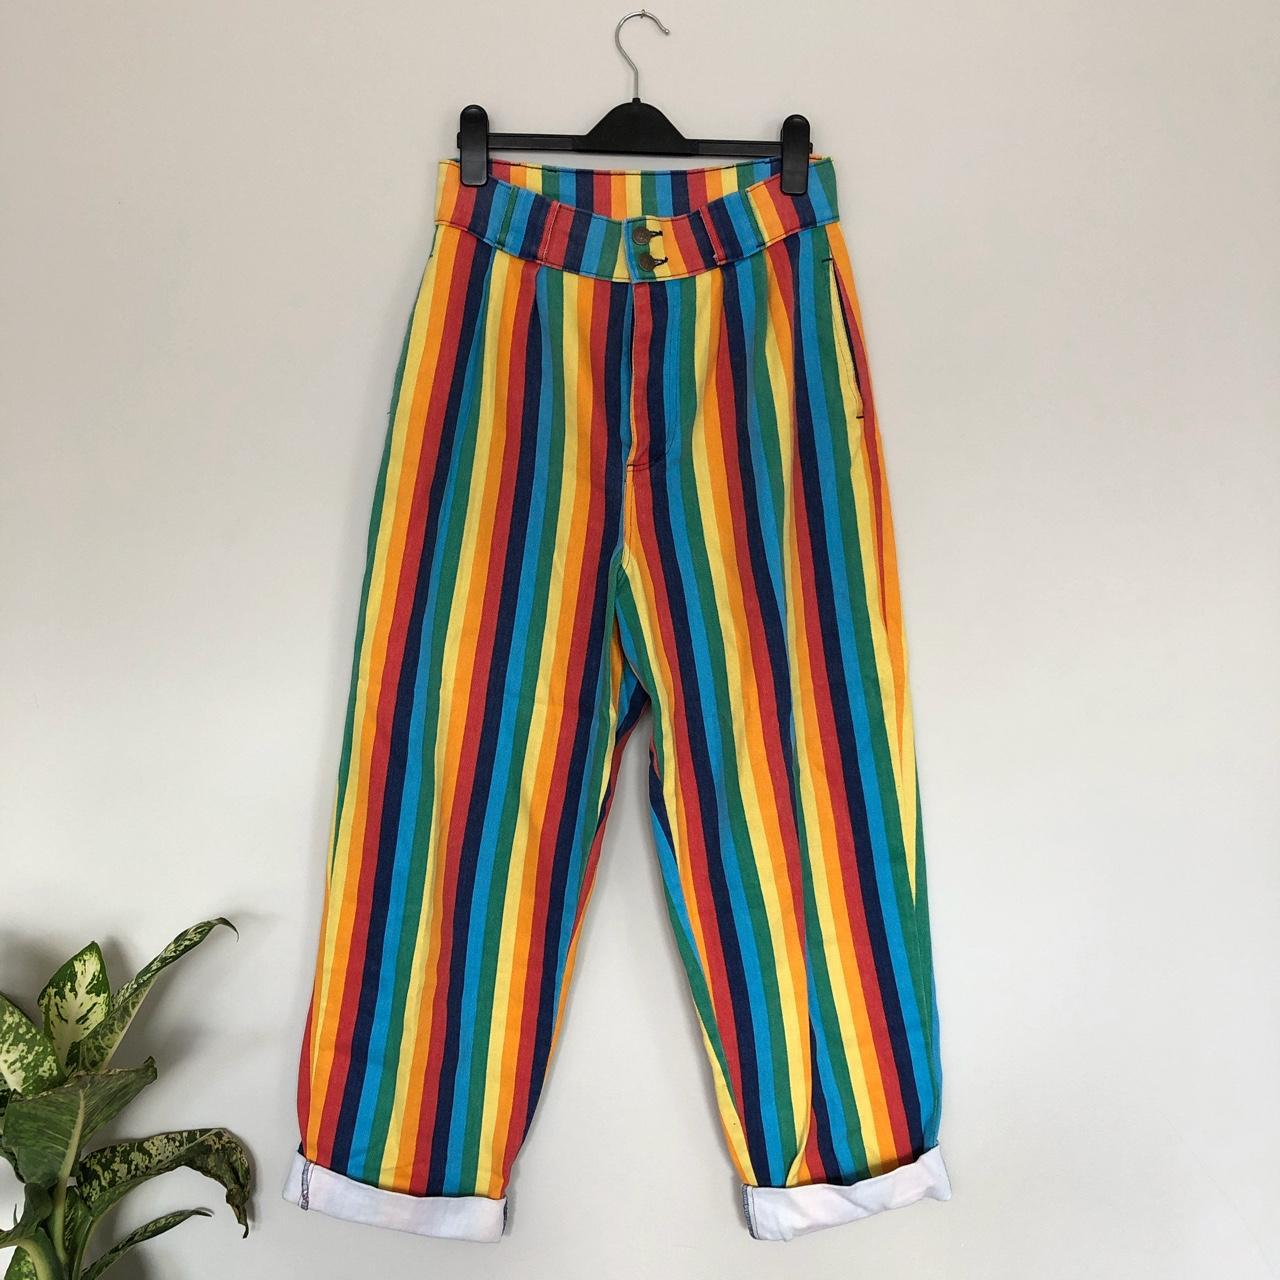 Lucy ☀ Yak Rainbow Addison Jeans 
</p>
<div class='sfsiaftrpstwpr'><div class='sfsi_responsive_icons' style='display:block;margin-top:10px; margin-bottom: 10px; width:100%' data-icon-width-type='Fully responsive' data-icon-width-size='240' data-edge-type='Round' data-edge-radius='5'  ><div class='sfsi_icons_container sfsi_responsive_without_counter_icons sfsi_medium_button_container sfsi_icons_container_box_fully_container ' style='width:100%;display:flex; text-align:center;' ><a target='_blank' href='https://www.facebook.com/sharer/sharer.php?u=https%3A%2F%2Fwww.dresses2022.com%2FDepop-Lucy-and-Yak%2F' style='display:block;text-align:center;margin-left:10px;  flex-basis:100%;' class=sfsi_responsive_fluid ><div class='sfsi_responsive_icon_item_container sfsi_responsive_icon_facebook_container sfsi_medium_button sfsi_responsive_icon_gradient sfsi_centered_icon' style=' border-radius:5px; width:auto; ' ><img style='max-height: 25px;display:unset;margin:0' class='sfsi_wicon' alt='facebook' src='https://www.dresses2022.com/wp-content/plugins/ultimate-social-media-icons/images/responsive-icon/facebook.svg'><span style='color:#fff'>Share on Facebook</span></div></a><a target='_blank' href='https://twitter.com/intent/tweet?text=Hey%2C+check+out+this+cool+site+I+found%3A+www.yourname.com+%23Topic+via%40my_twitter_name&url=https%3A%2F%2Fwww.dresses2022.com%2FDepop-Lucy-and-Yak%2F' style='display:block;text-align:center;margin-left:10px;  flex-basis:100%;' class=sfsi_responsive_fluid ><div class='sfsi_responsive_icon_item_container sfsi_responsive_icon_twitter_container sfsi_medium_button sfsi_responsive_icon_gradient sfsi_centered_icon' style=' border-radius:5px; width:auto; ' ><img style='max-height: 25px;display:unset;margin:0' class='sfsi_wicon' alt='Twitter' src='https://www.dresses2022.com/wp-content/plugins/ultimate-social-media-icons/images/responsive-icon/Twitter.svg'><span style='color:#fff'>Tweet</span></div></a><a target='_blank' href='https://follow.it/now' style='display:block;text-align:center;margin-left:10px;  flex-basis:100%;' class=sfsi_responsive_fluid ><div class='sfsi_responsive_icon_item_container sfsi_responsive_icon_follow_container sfsi_medium_button sfsi_responsive_icon_gradient sfsi_centered_icon' style=' border-radius:5px; width:auto; ' ><img style='max-height: 25px;display:unset;margin:0' class='sfsi_wicon' alt='Follow' src='https://www.dresses2022.com/wp-content/plugins/ultimate-social-media-icons/images/responsive-icon/Follow.png'><span style='color:#fff'>Follow us</span></div></a><a target='_blank' href='https://www.pinterest.com/pin/create/link/?url=https%3A%2F%2Fwww.dresses2022.com%2FDepop-Lucy-and-Yak%2F' style='display:block;text-align:center;margin-left:10px;  flex-basis:100%;' class=sfsi_responsive_fluid ><div class='sfsi_responsive_icon_item_container sfsi_responsive_icon_pinterest_container sfsi_medium_button sfsi_responsive_icon_gradient sfsi_centered_icon' style=' border-radius:5px; width:auto; ' ><img style='max-height: 25px;display:unset;margin:0' class='sfsi_wicon' alt='Pinterest' src='https://www.dresses2022.com/wp-content/plugins/ultimate-social-media-icons/images/responsive-icon/Pinterest.svg'><span style='color:#fff'>Save</span></div></a></div></div></div><!--end responsive_icons-->	</div>
	
	<footer class=